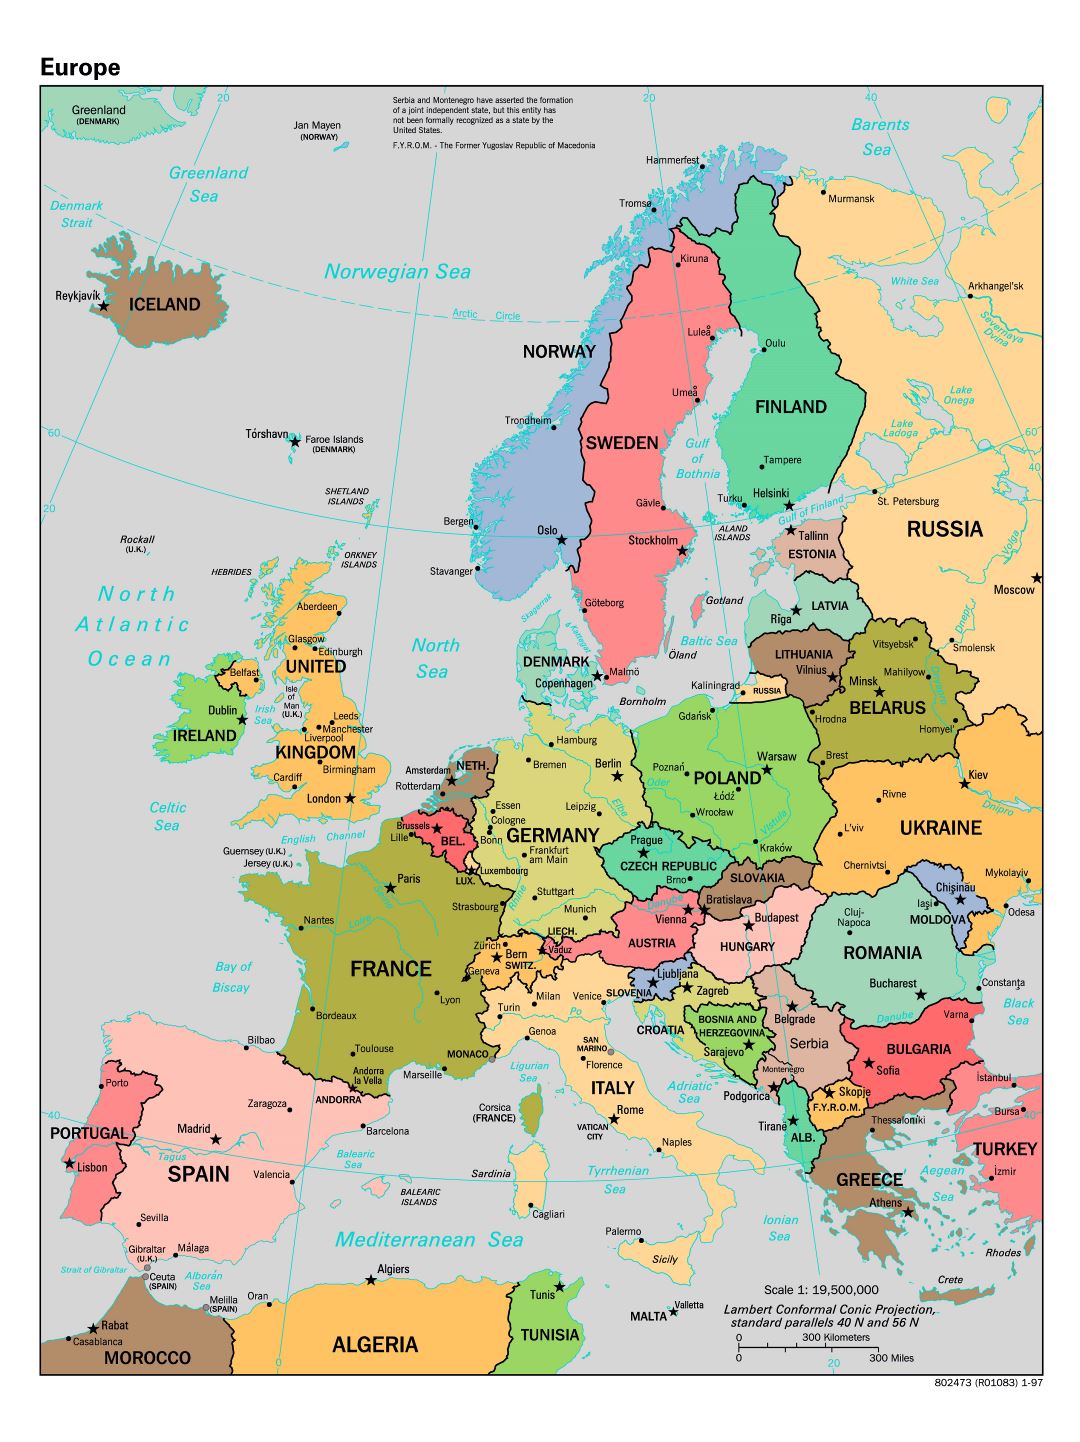 Large scale political map of Europe - 1997